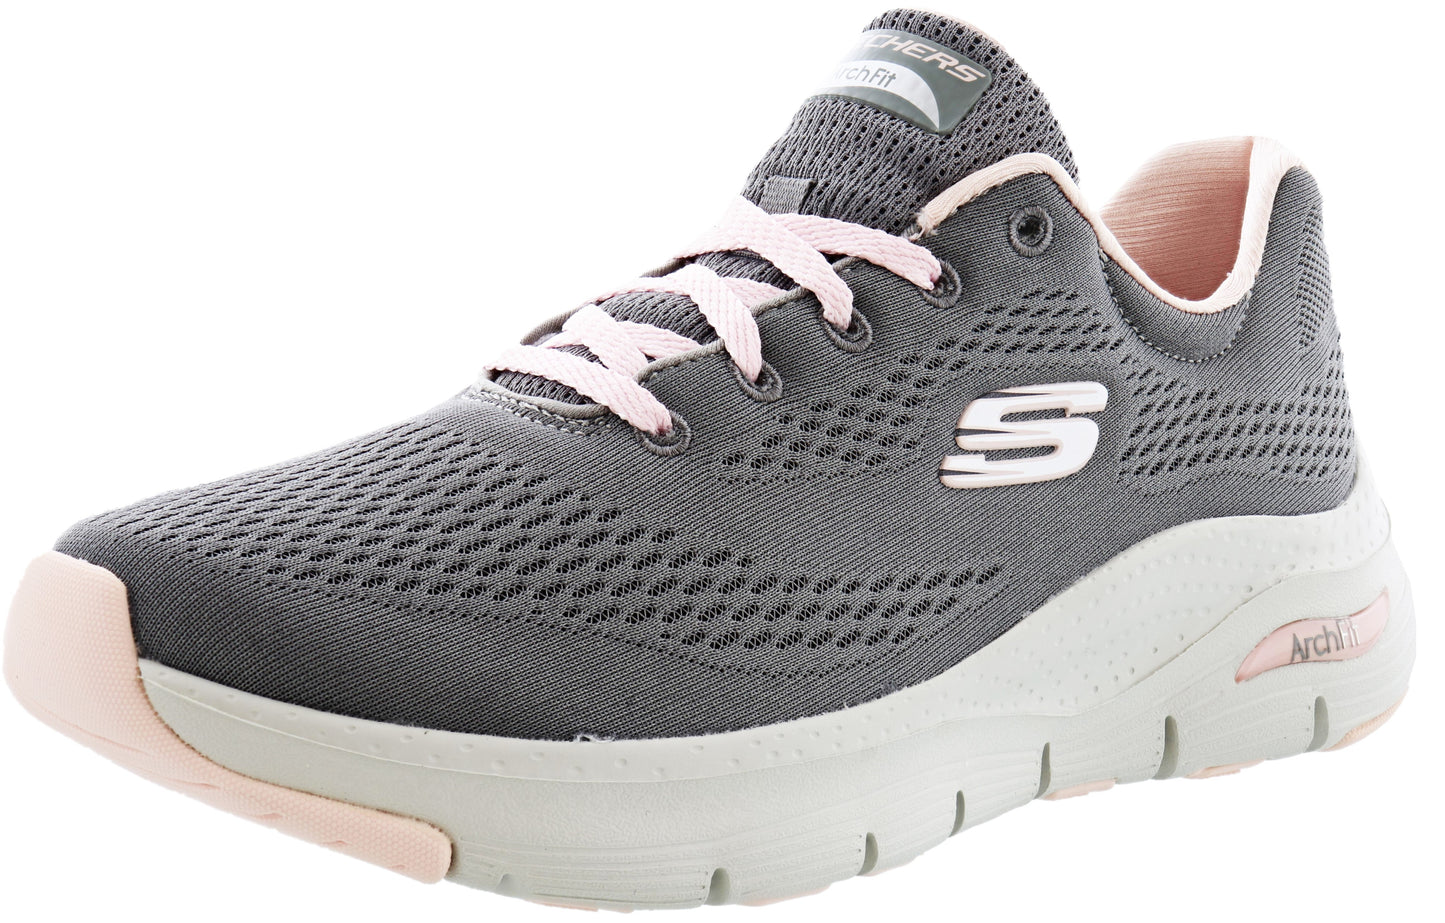 Arch Fit® by Skechers: The Benefits of Arch Support